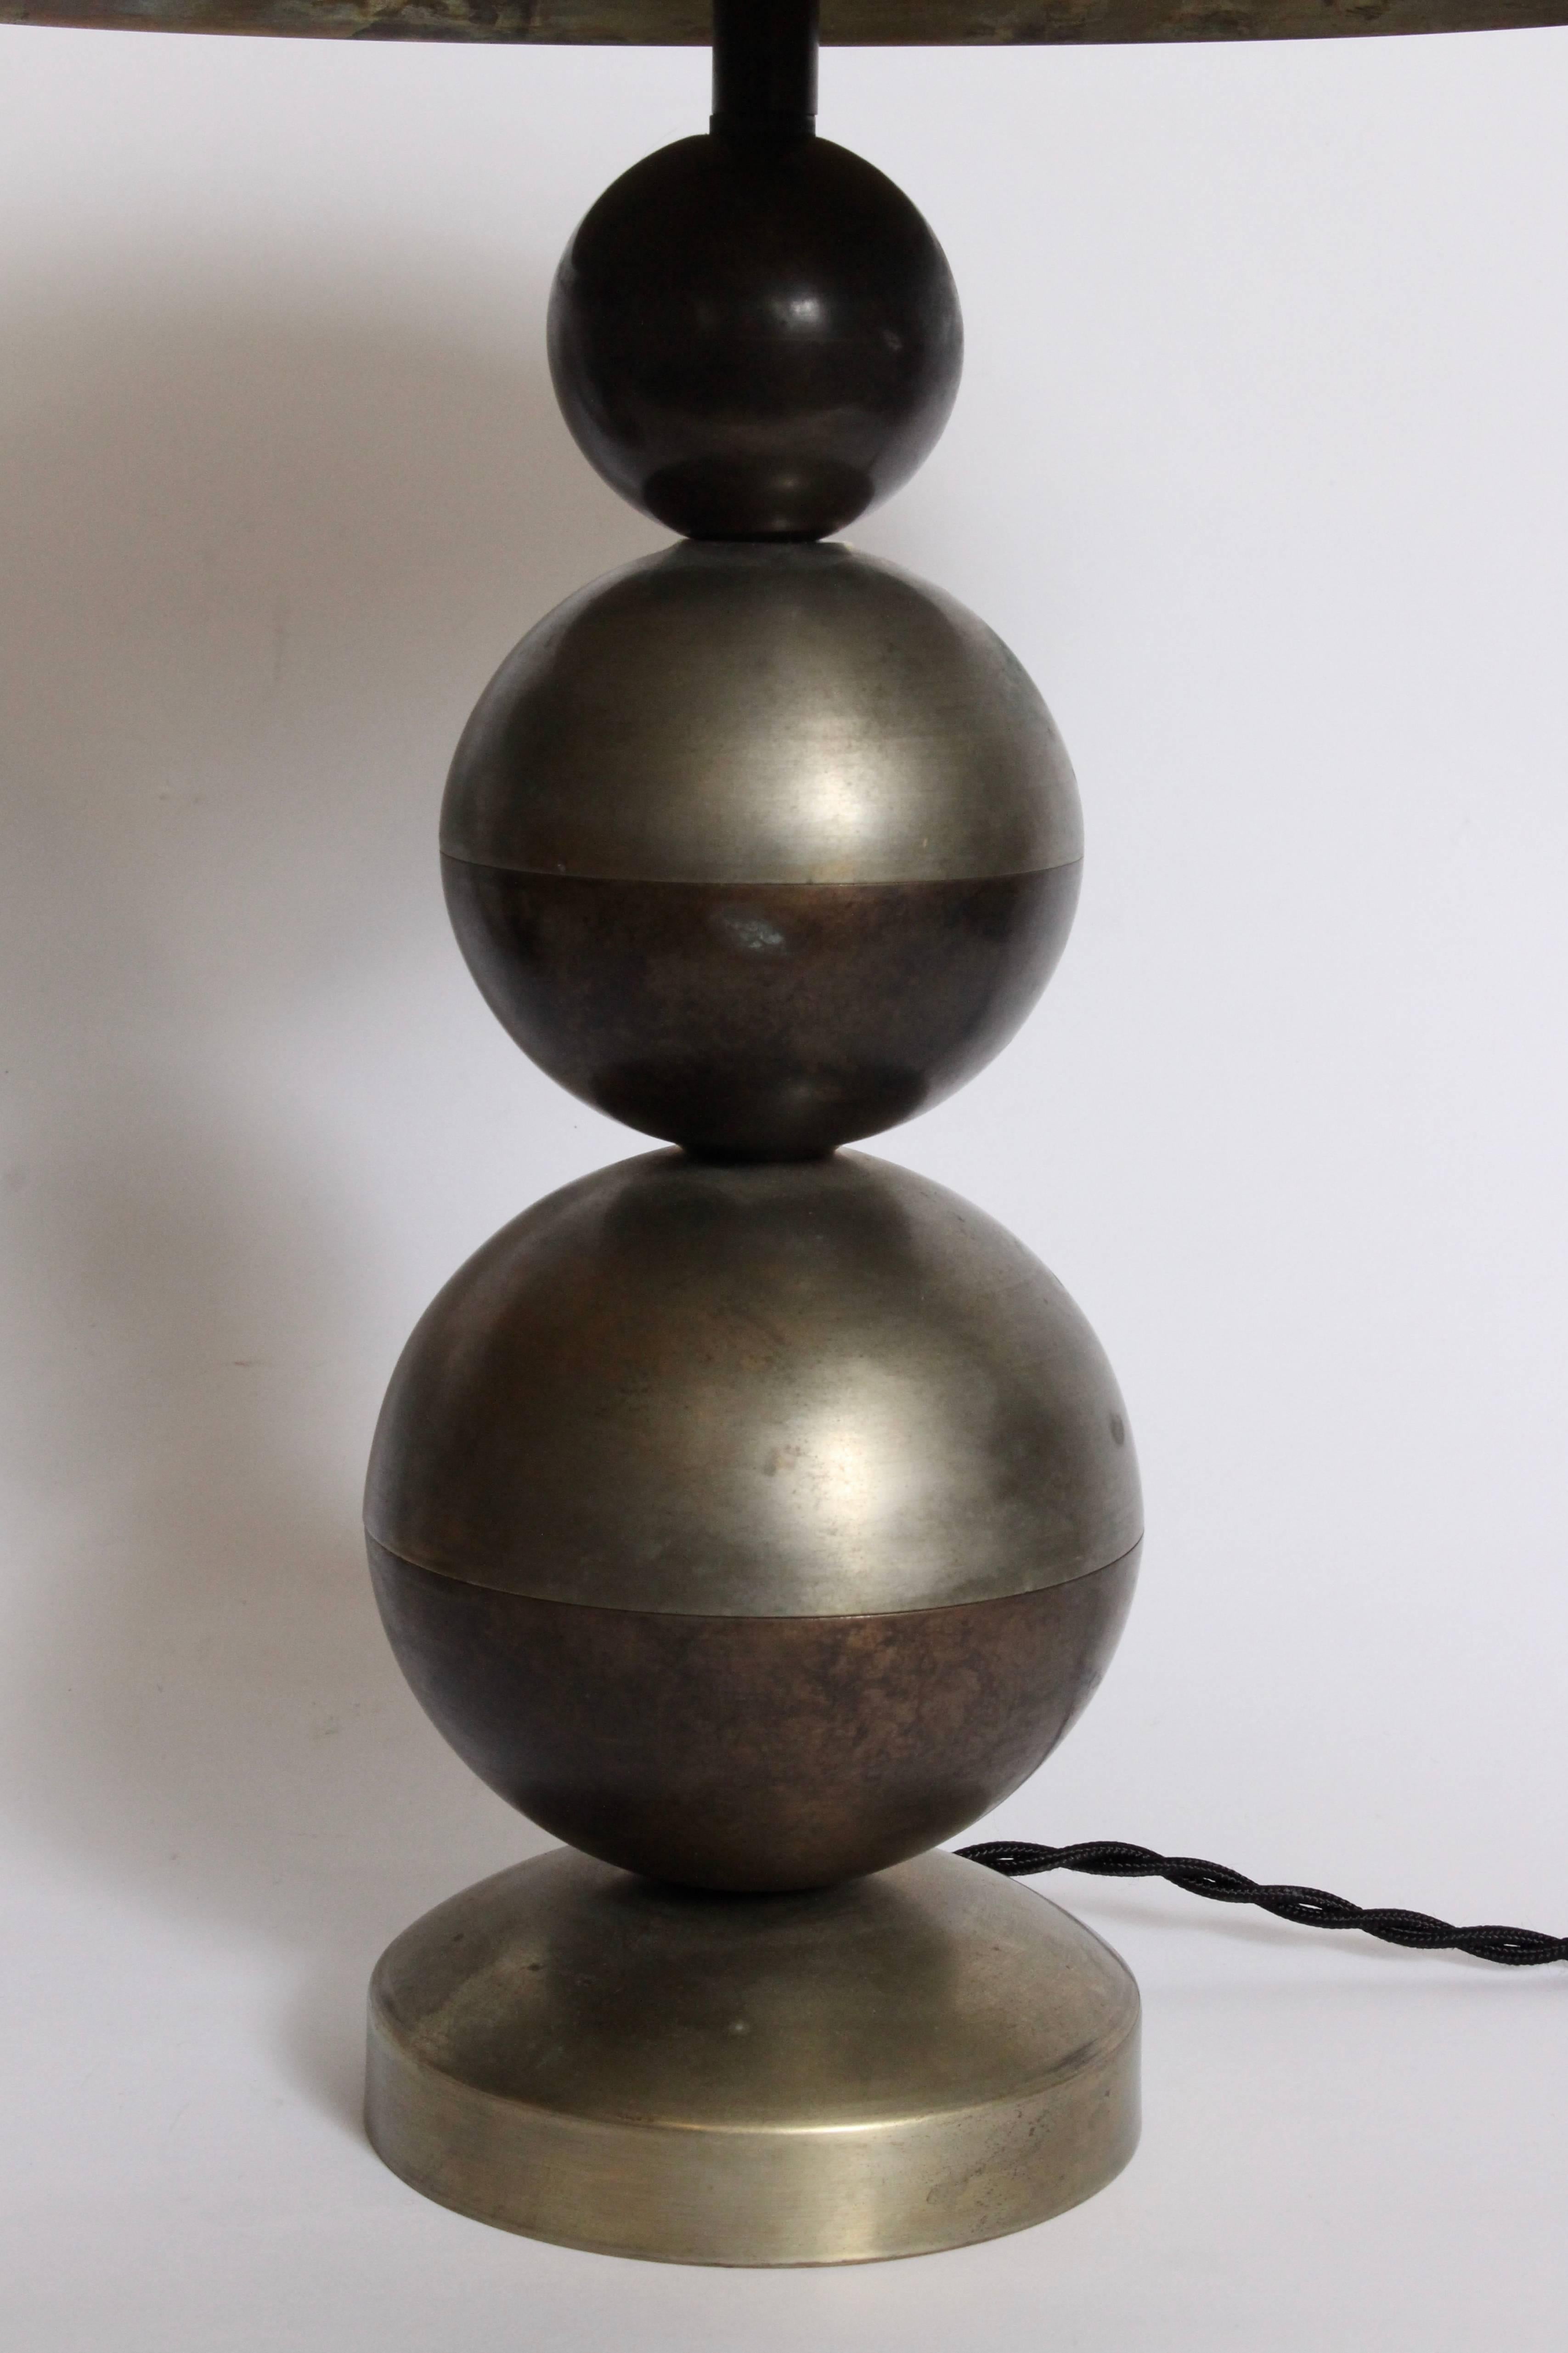 Austrian Pair of Boris Lacroix Stacked Nickel Plate & Brass Table Lamps with Dome Shades